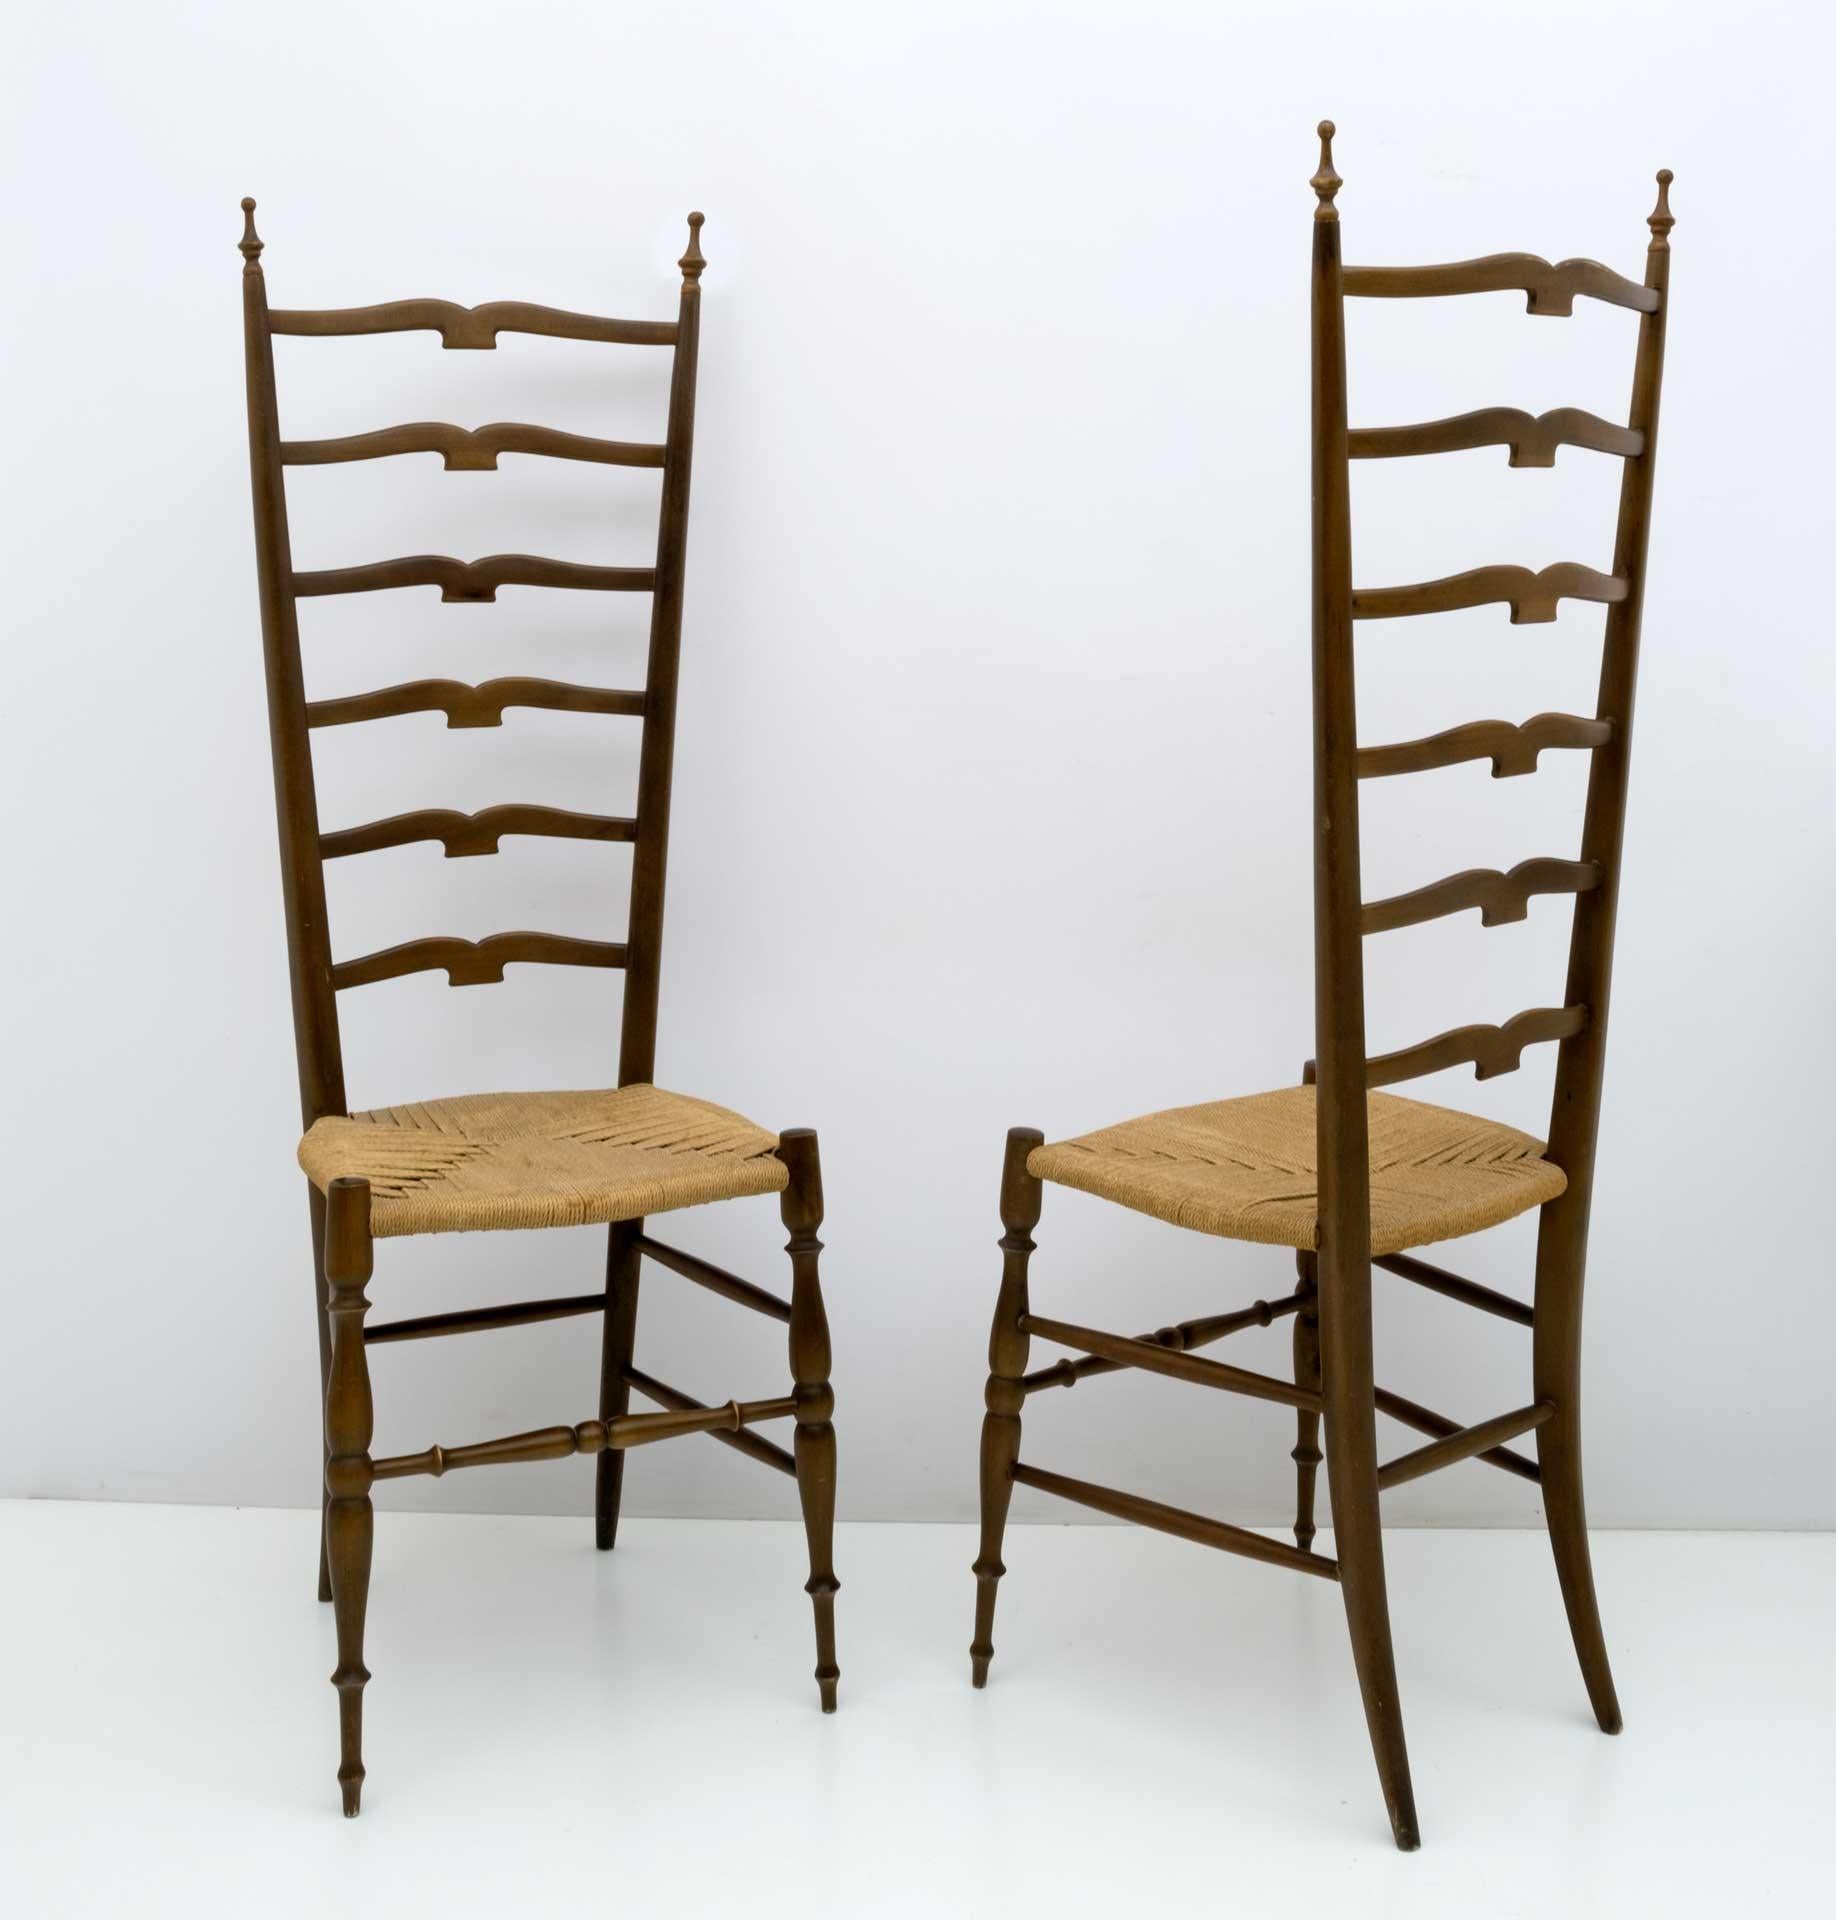 Pair of fantastic high-backed ladder chairs in light walnut-stained beech with original period jute rope seats. These amazing pieces were designed by Paolo Buffa Chiavari in the 1950s in Italy.